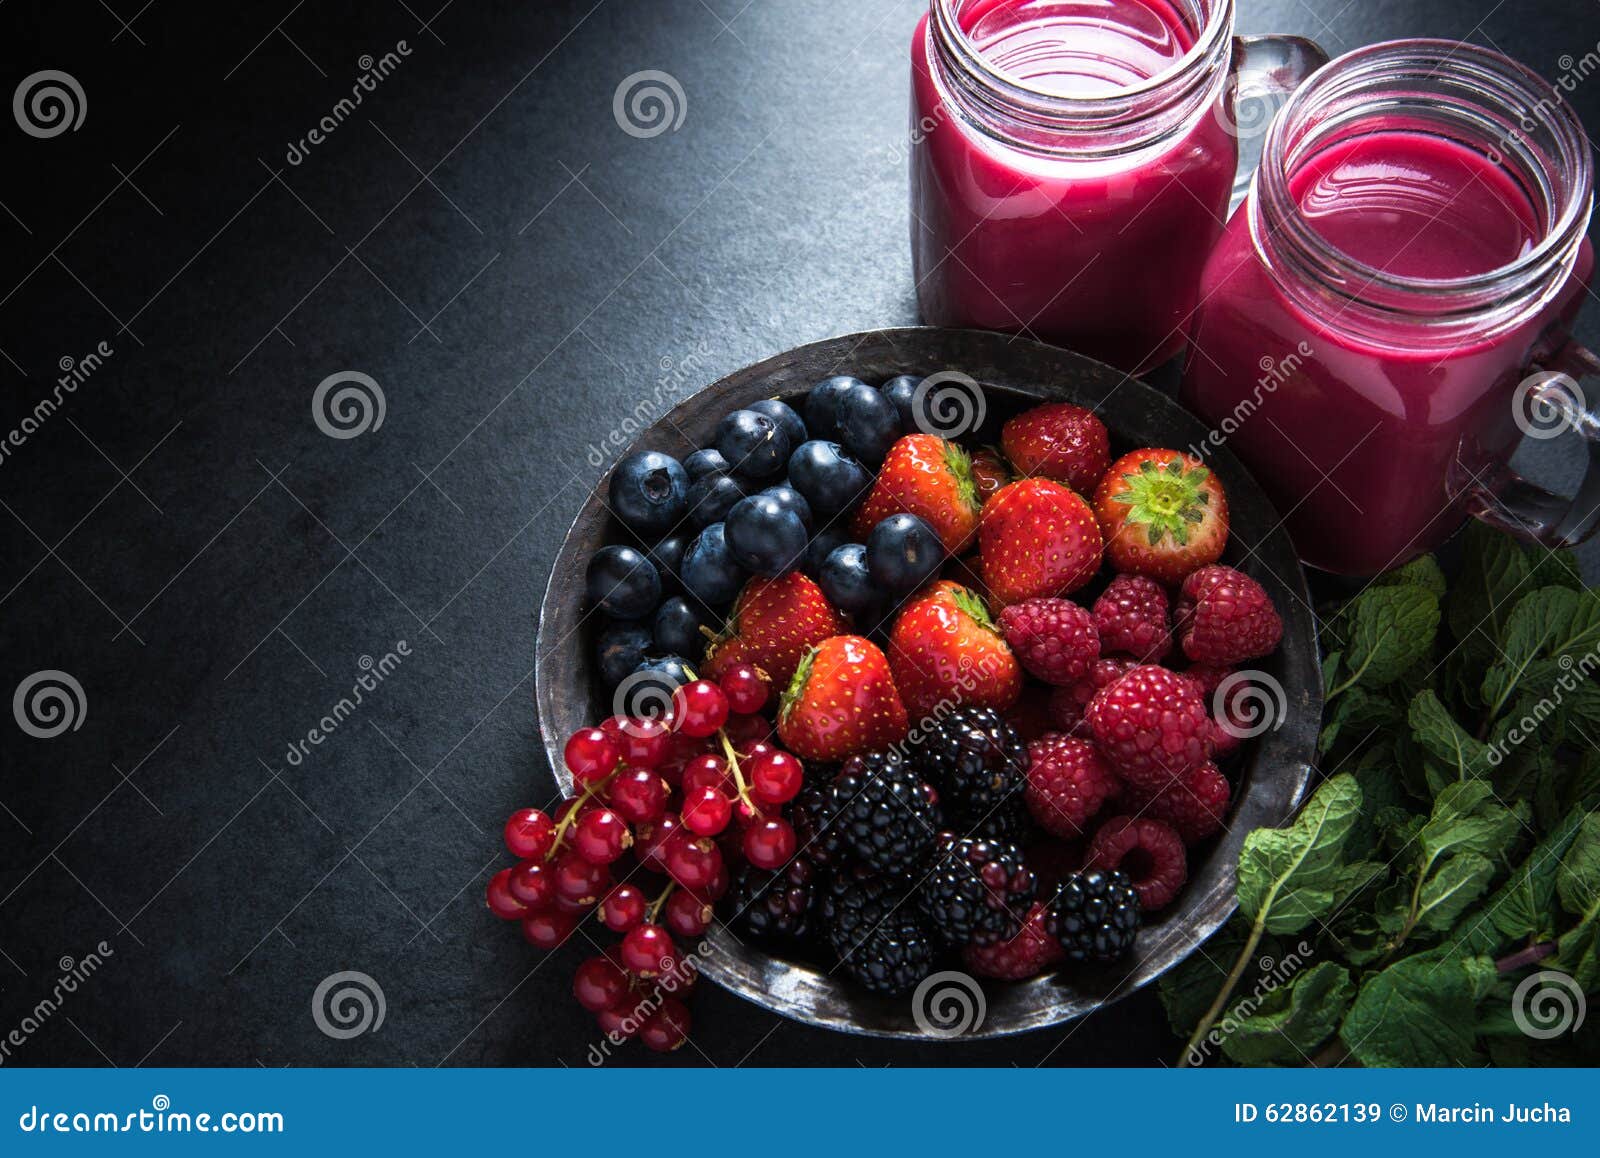 antioxidant all berries fruit smoothie